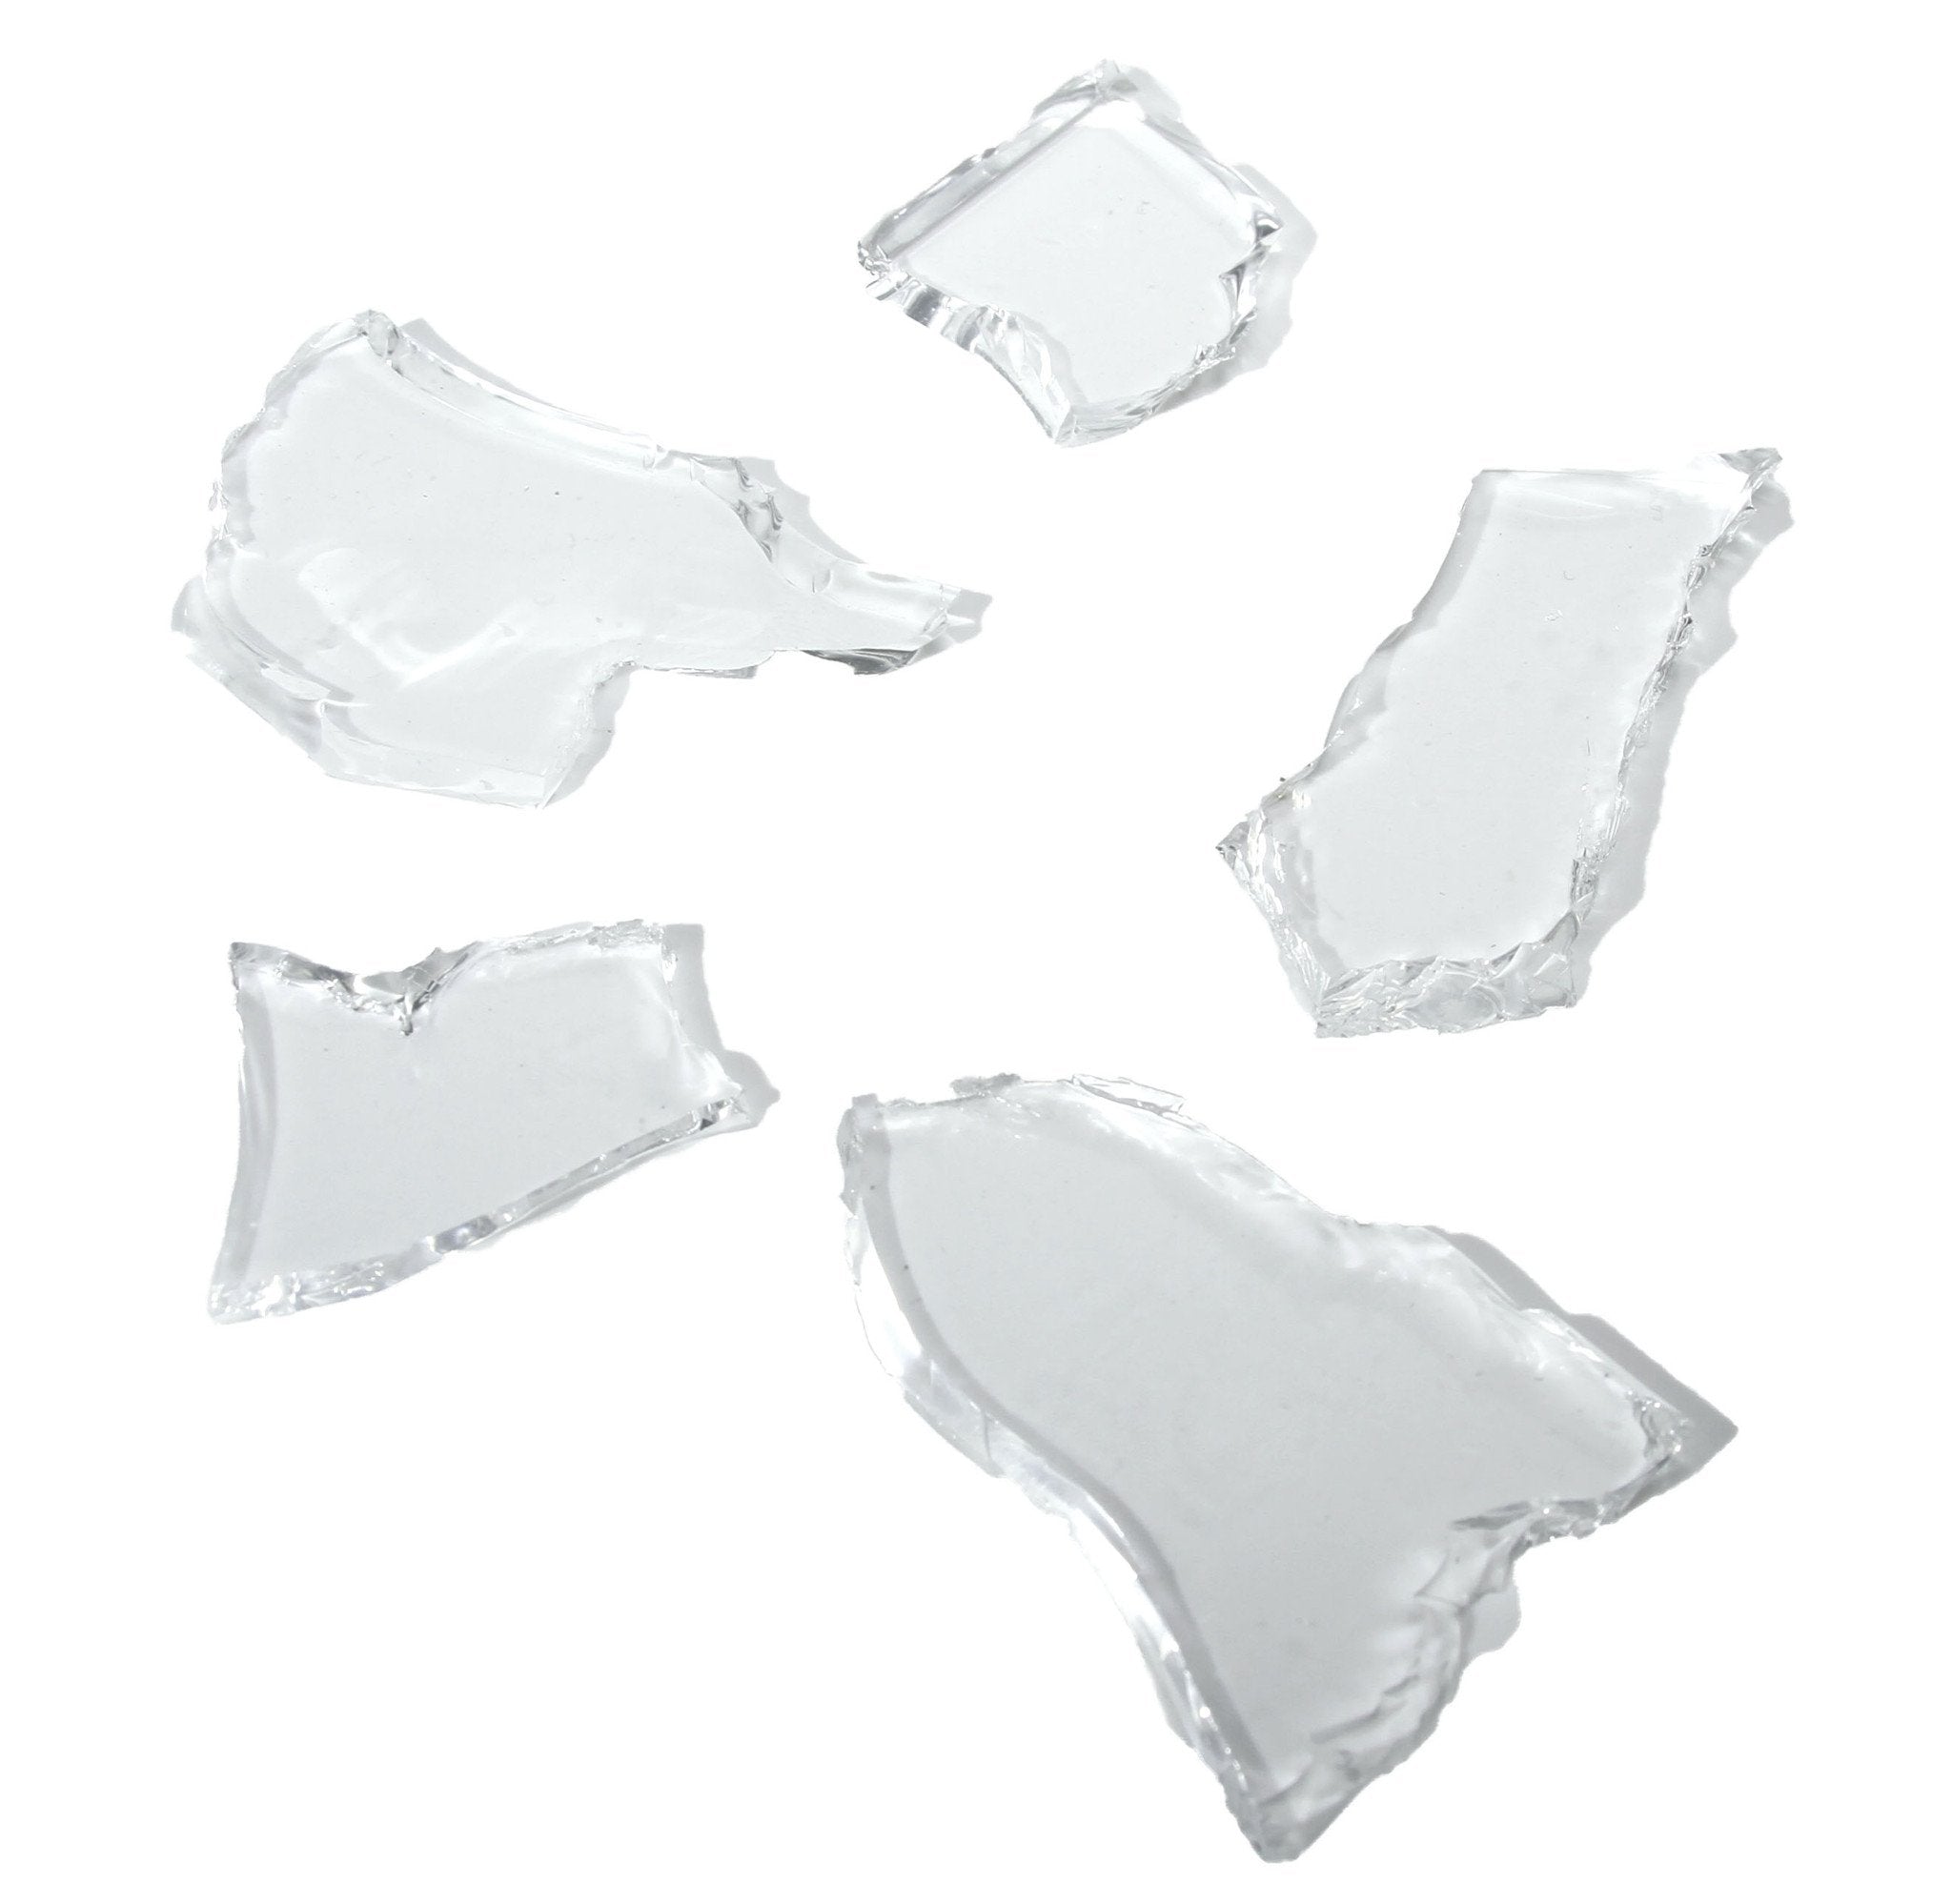 Crystal Clear Silicone Rubber Glass - PIECES 1 LB - Pieces,1 Pound